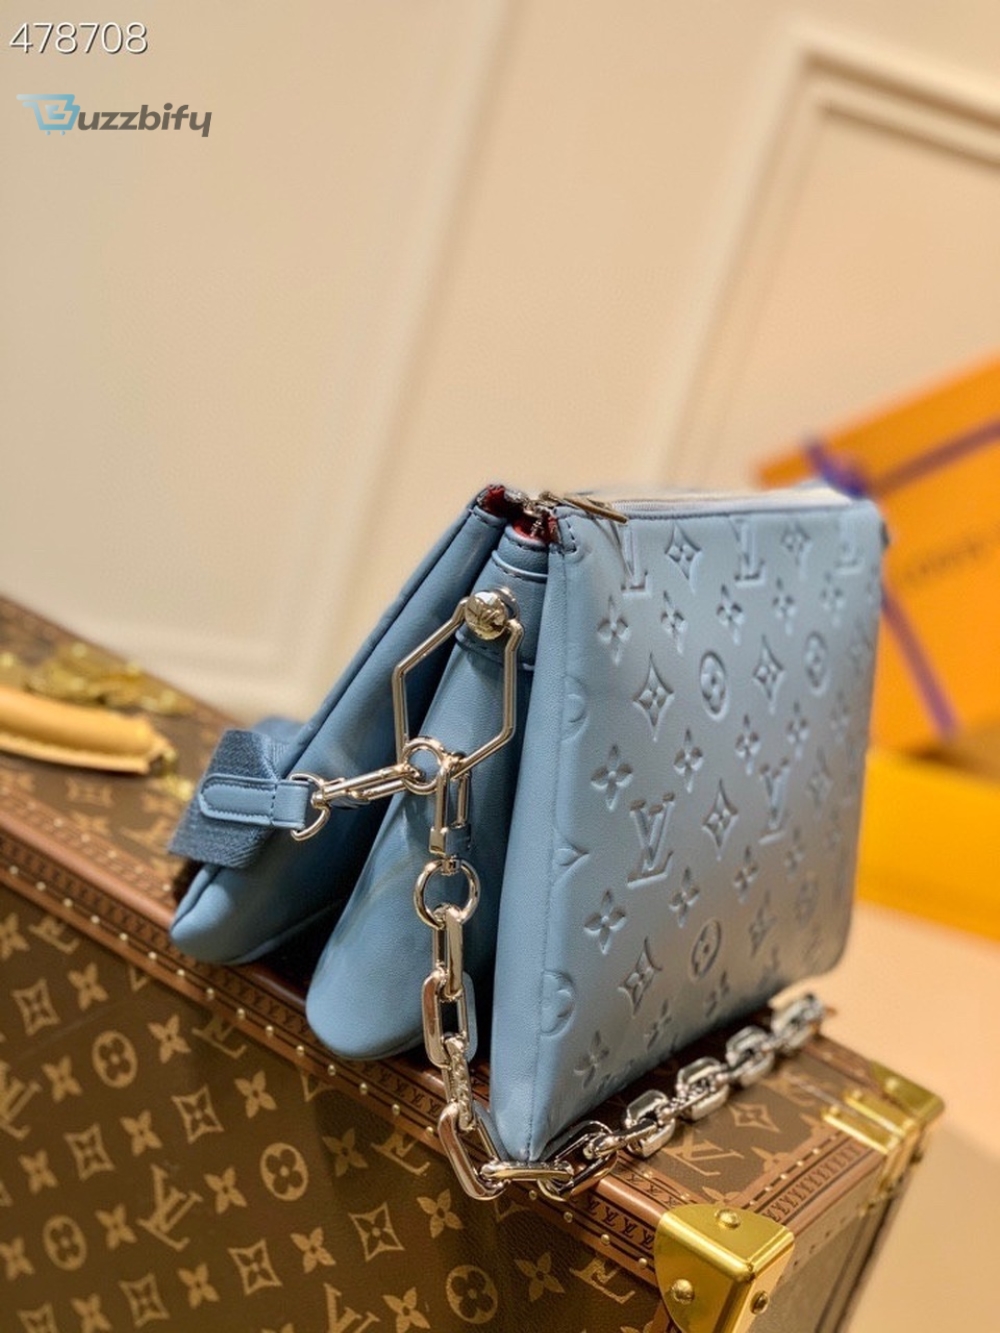 Louis Vuitton Coussin Pm Monogram Embossed Puffy Light Blue For Women Womens Handbags Shoulder And Crossbody Bags 10.2In26cm Lv